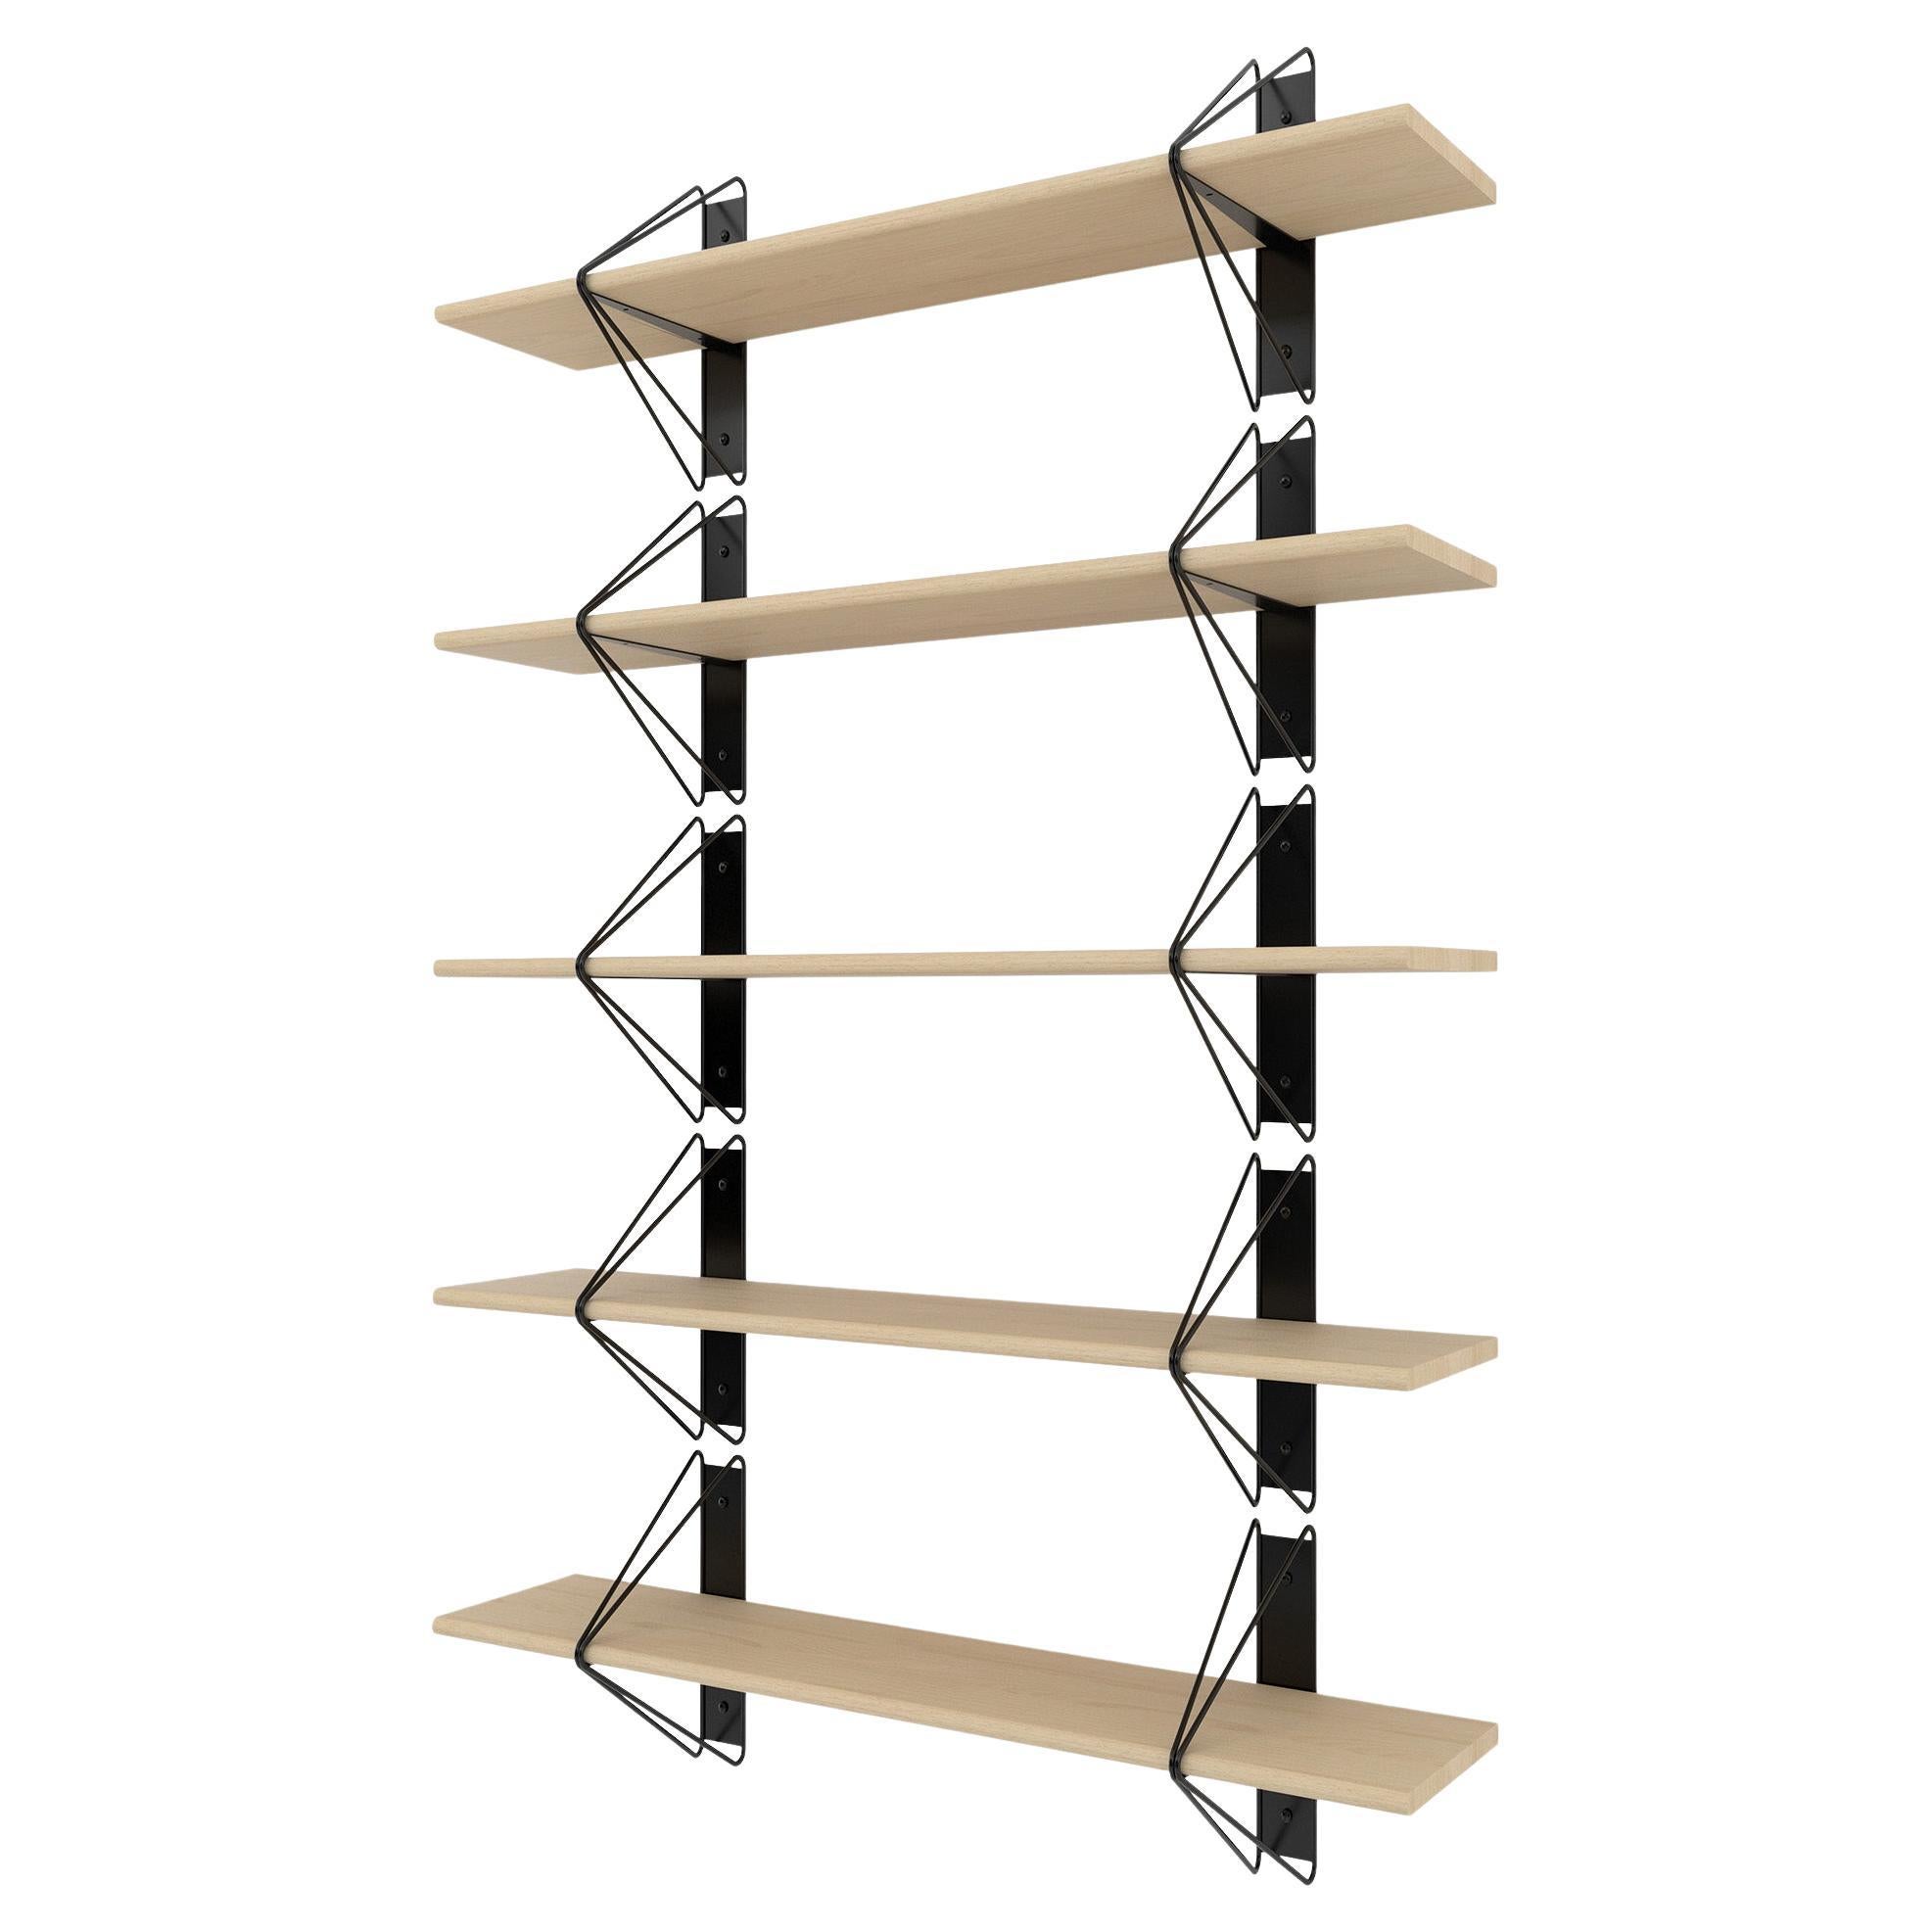 Set of 5 Strut Shelves from Souda, Black and Maple, Made to Order For Sale